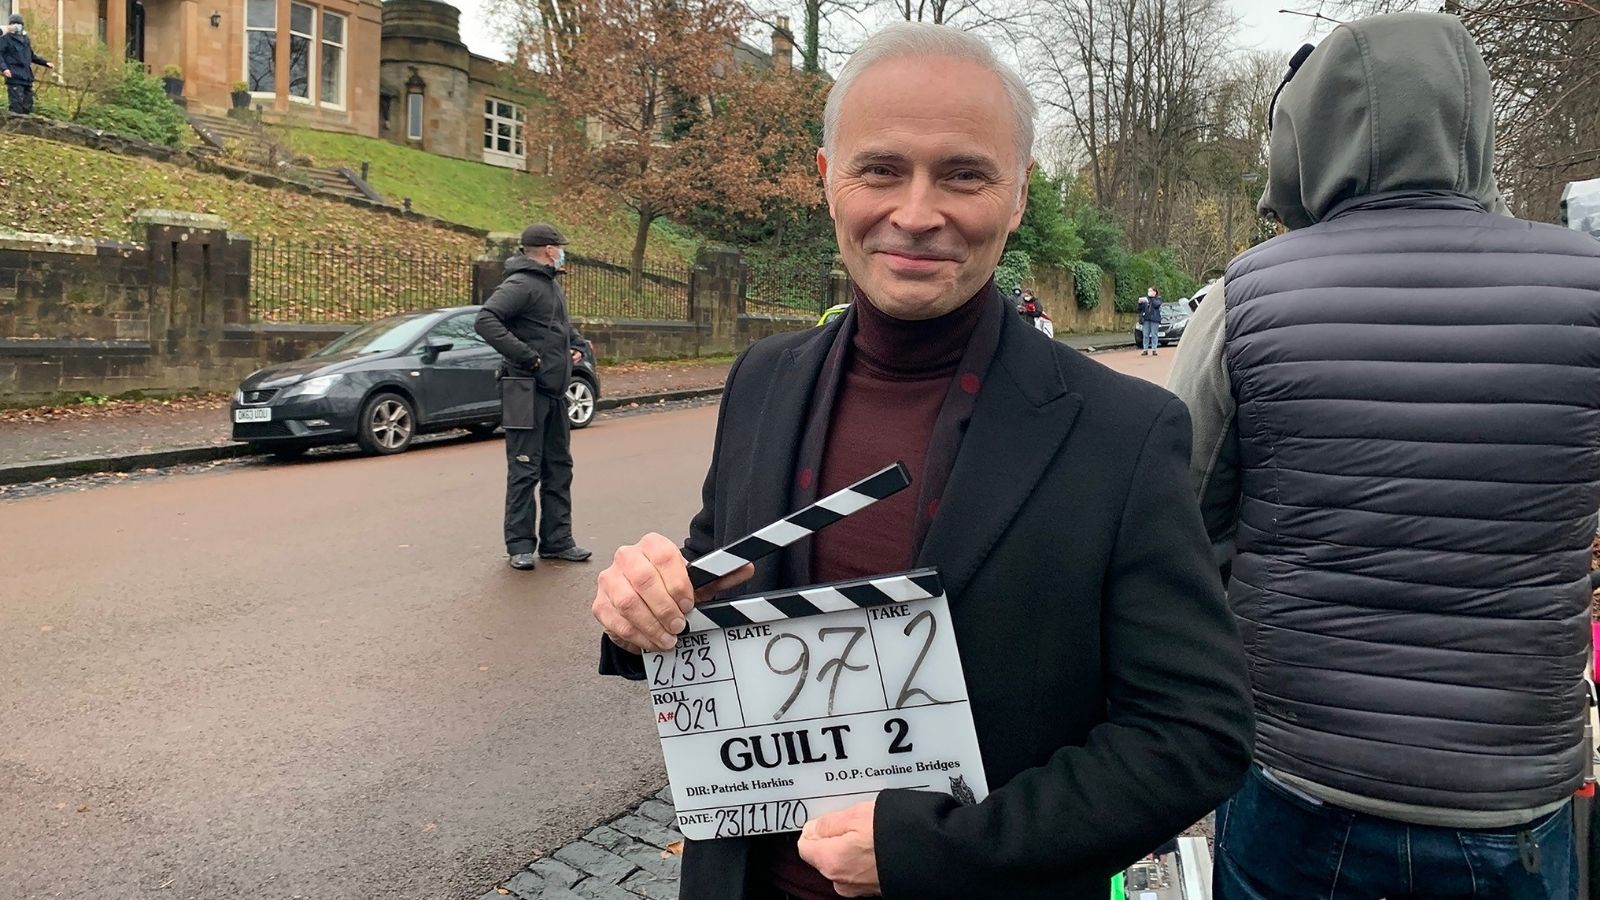 Mark Bonnar, star of Guilt, holding a clapper board and smiling on a street.